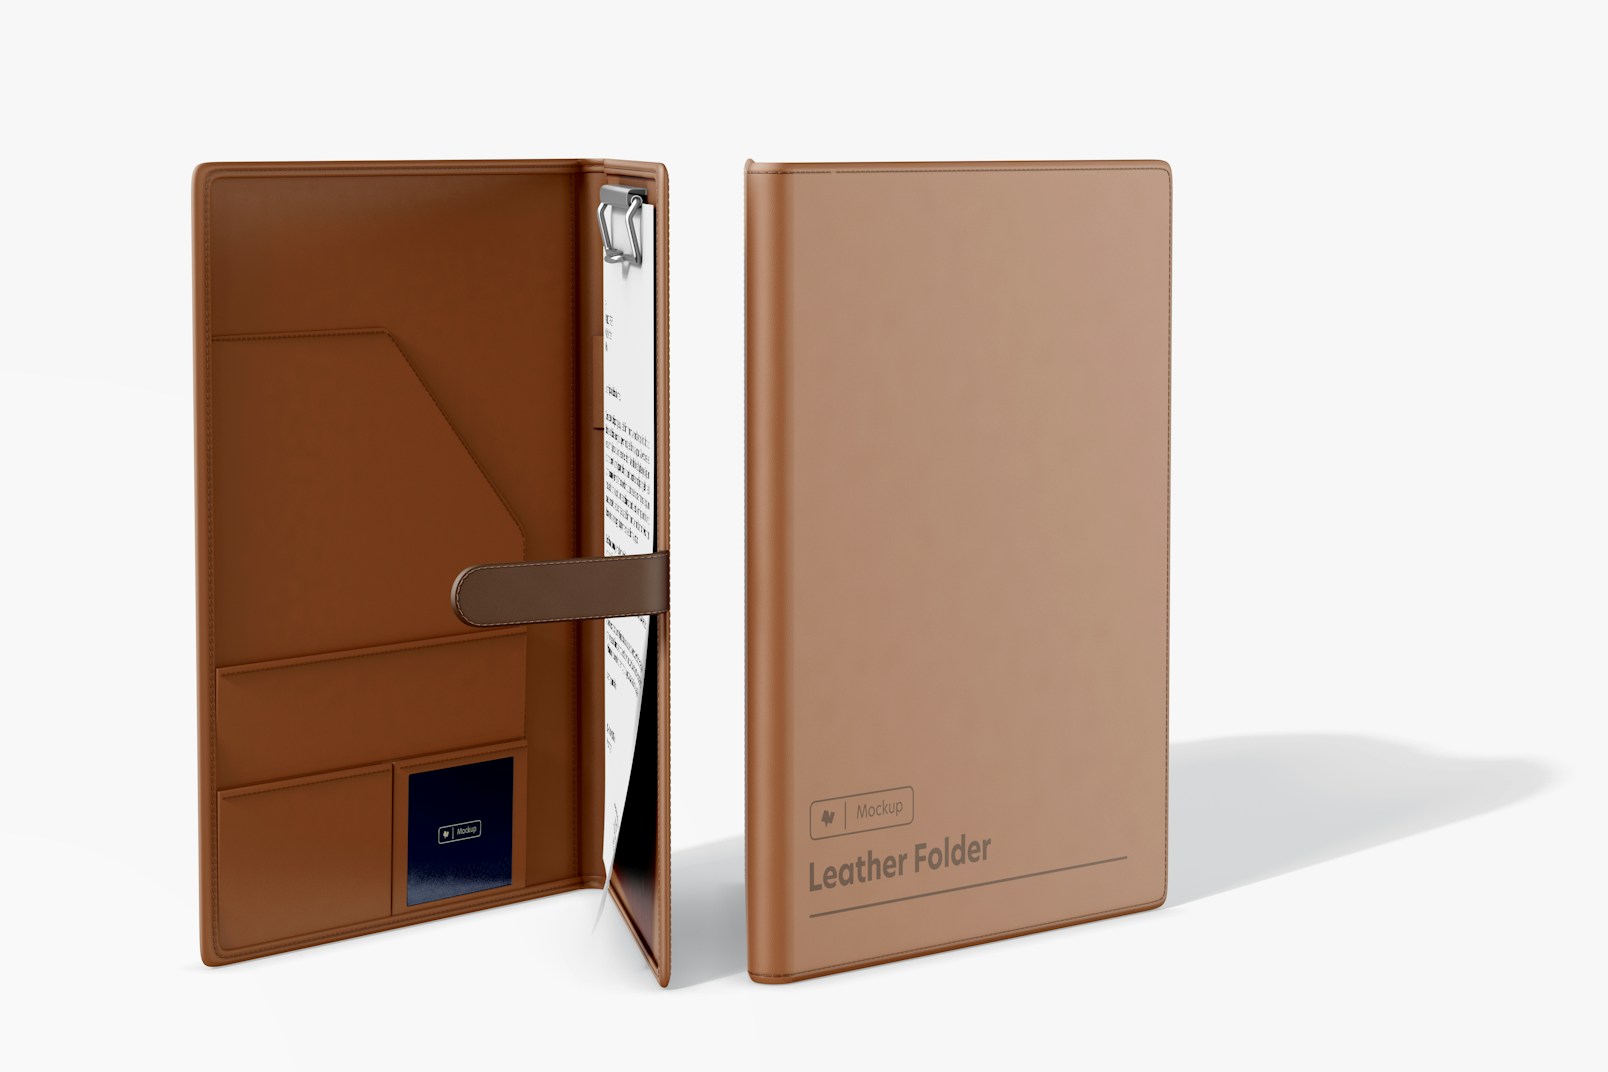 Leather Folder with Tab Mockup, Opened and Closed